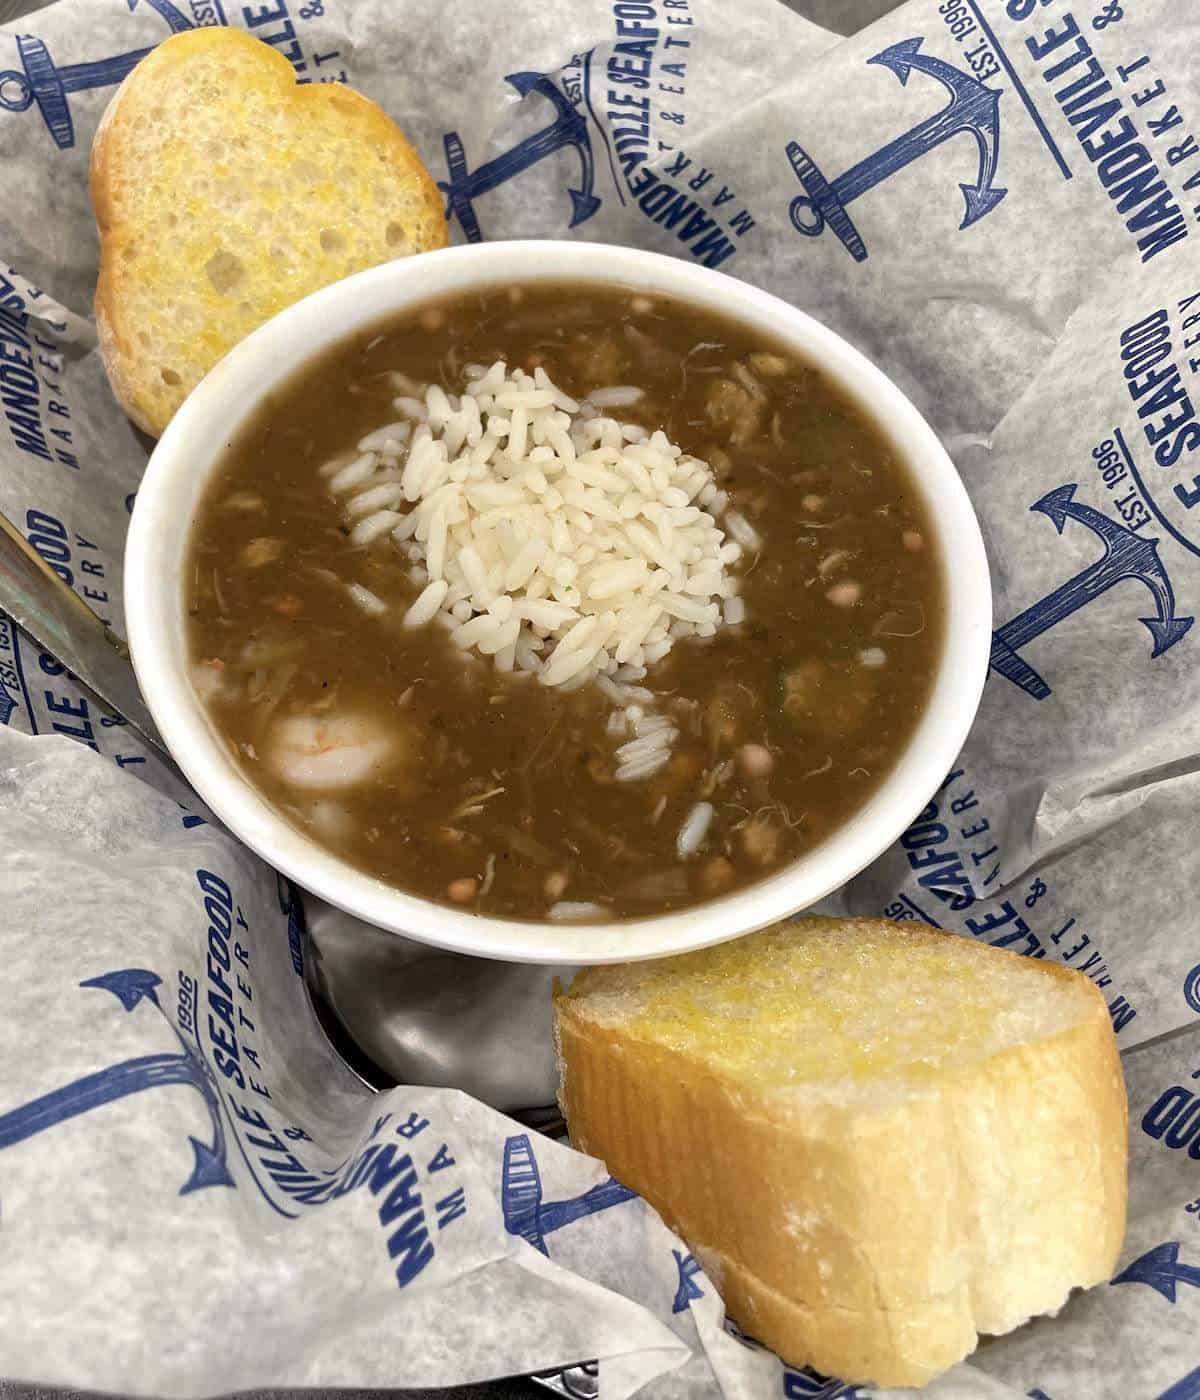 A bowl of seafood gumbo from Mandeville seafood with buttered French Bread.